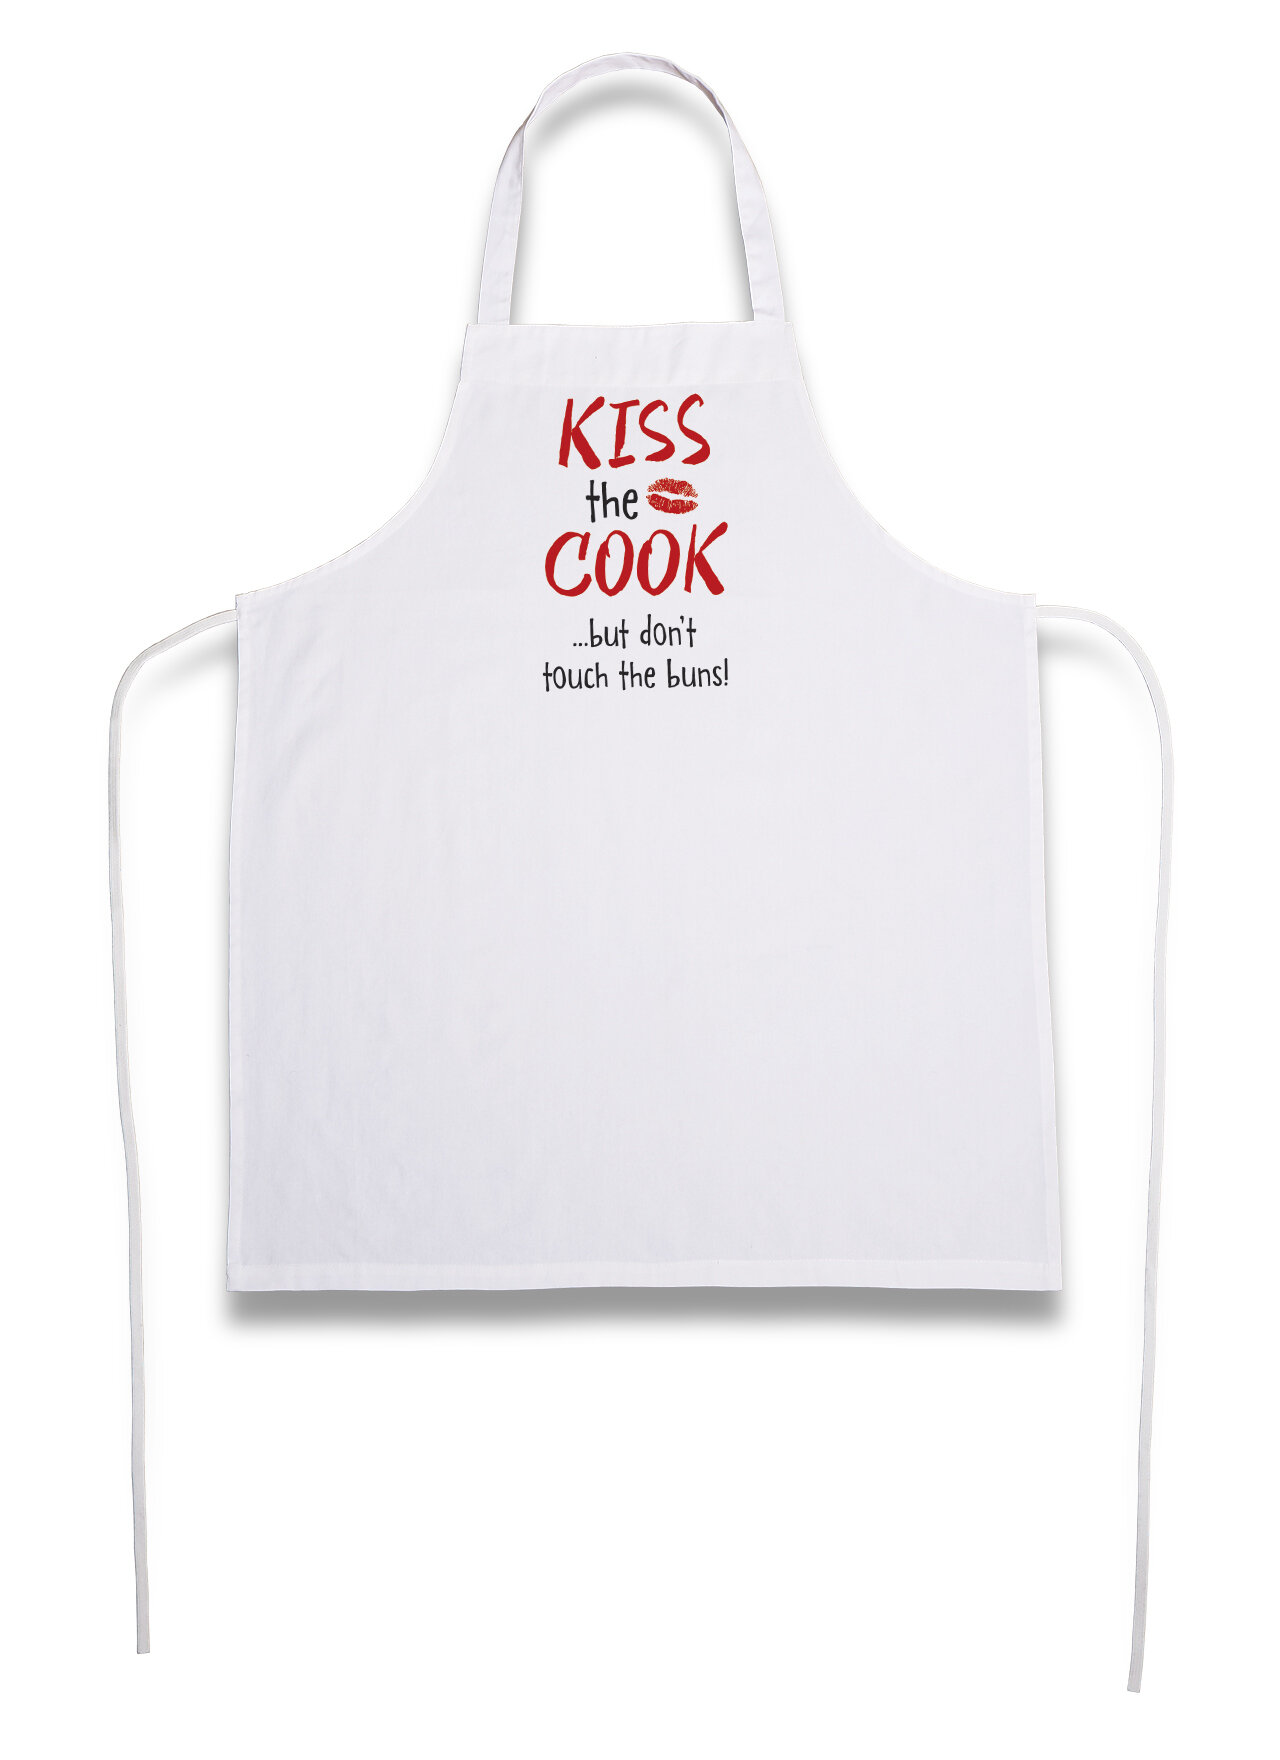 My Kissin' is Better than my Cookin' Apron